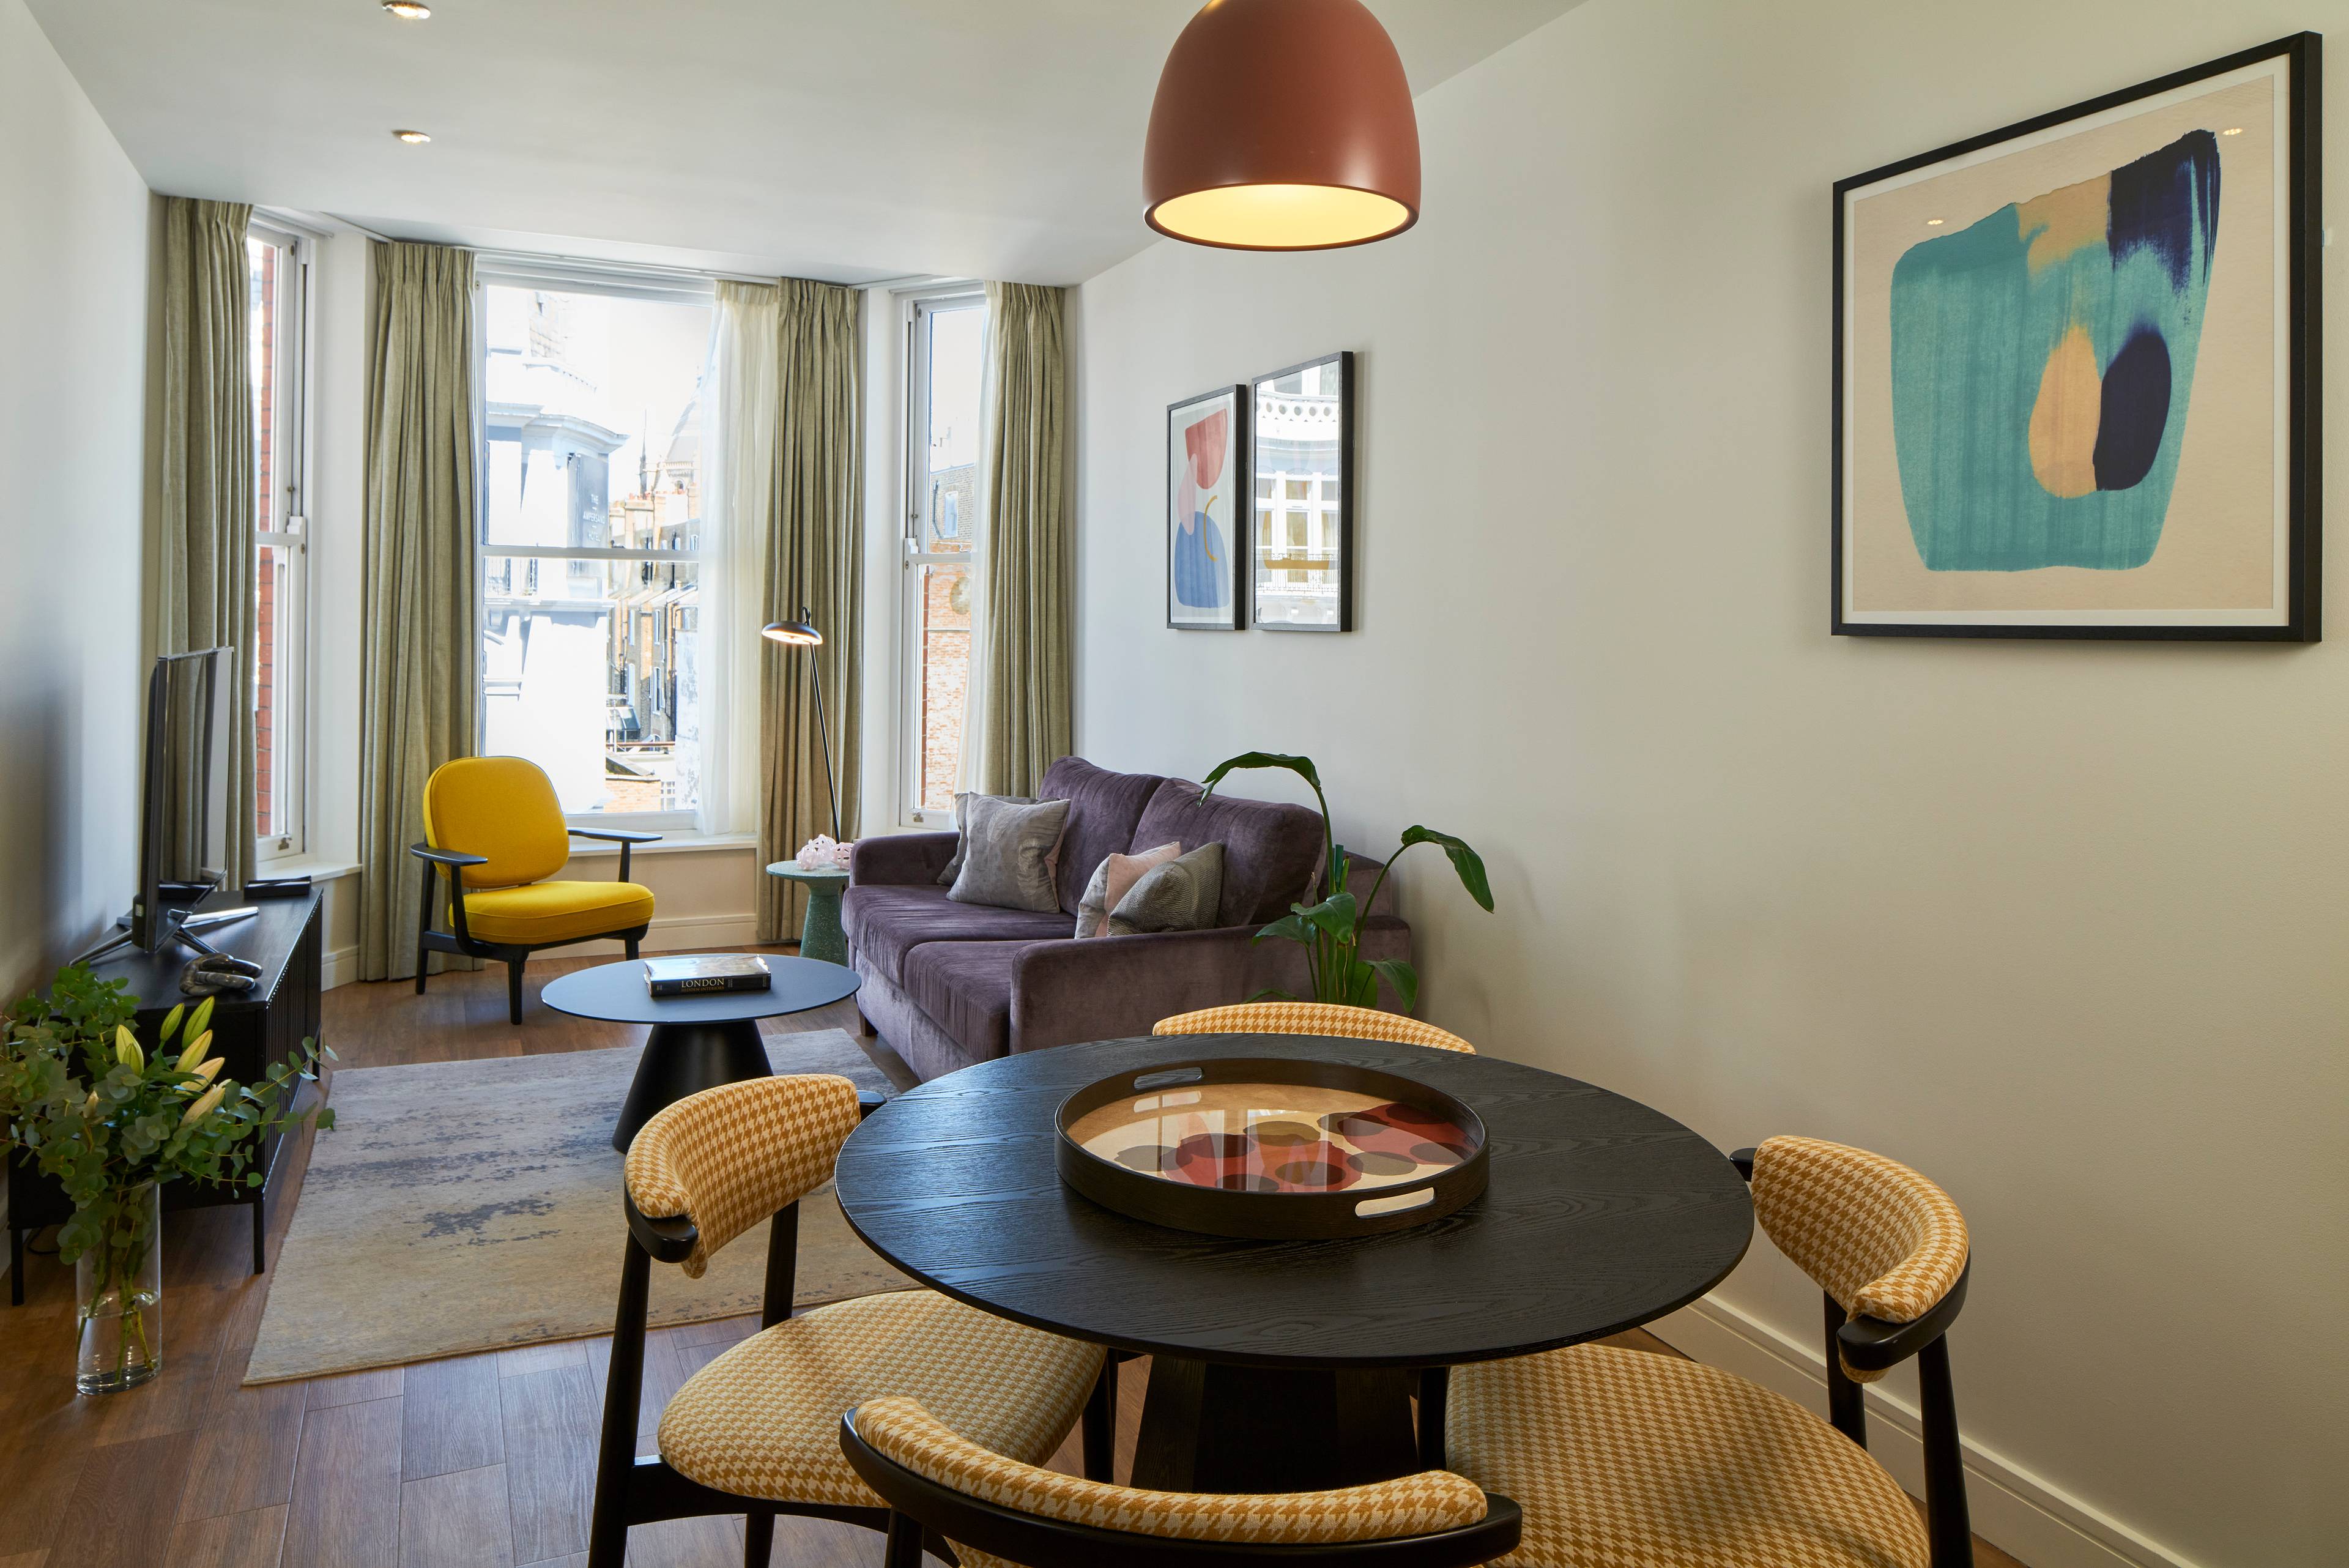 Newly Refurbished Luxury Two-Bedroom Serviced Apartment with Premium Amenities in Trendy South Kensington